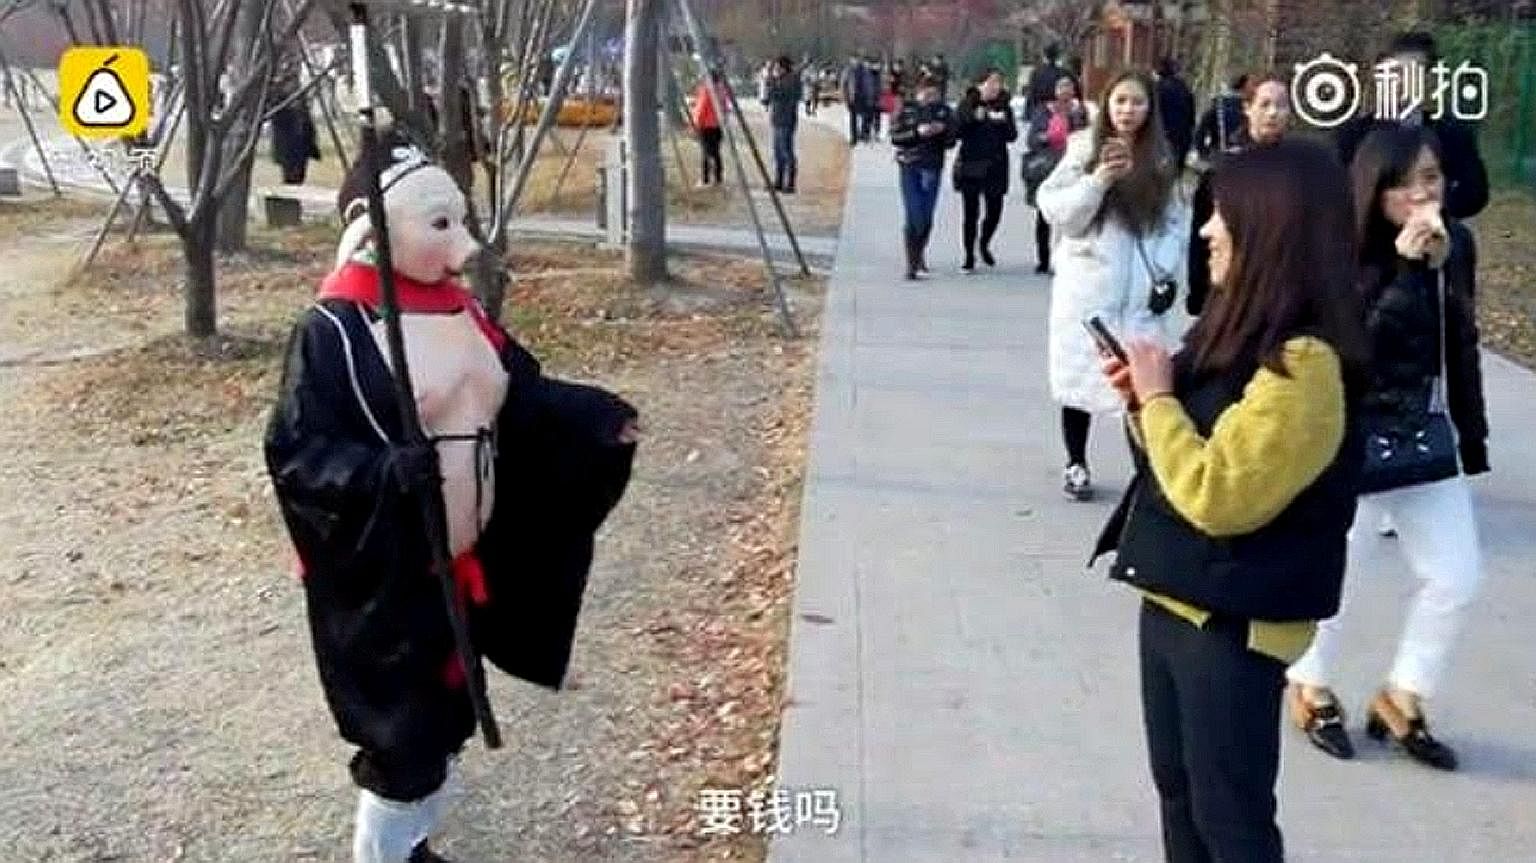 Ms Wu Xiue dresses as fictional character Pigsy from the classic tale Journey To The West to raise money for her mentally ill husband and son. Ariel Olivar's six-second video (left), posted on Dec 2, shows her stepping on an imaginary box on one leg 